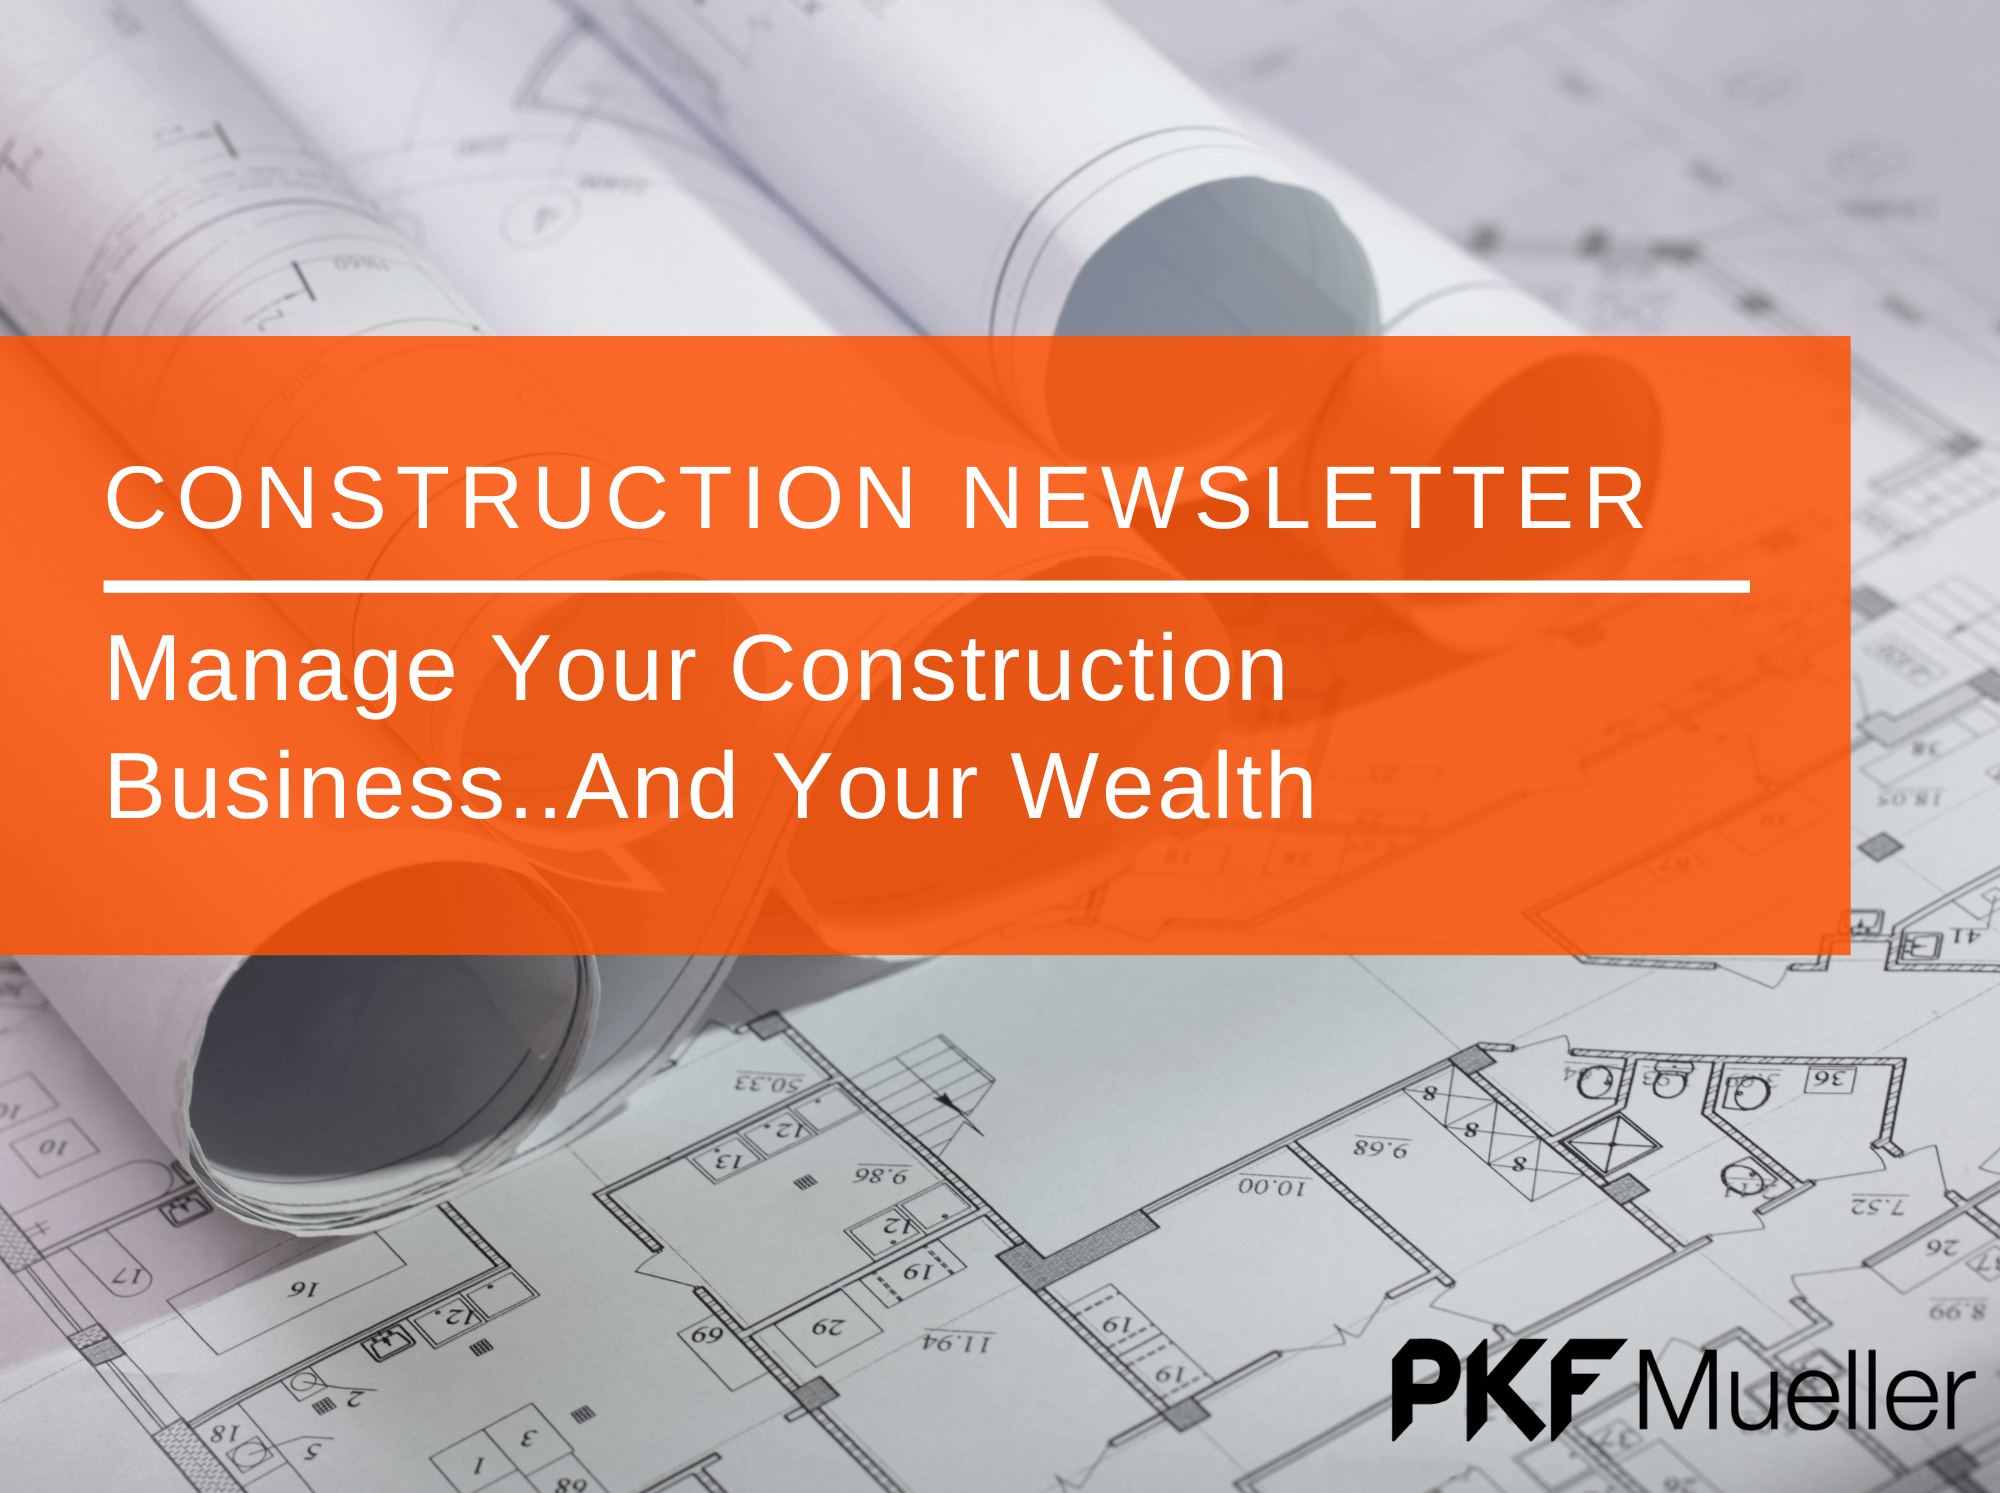 Manage Your Construction Business... And Your Wealth